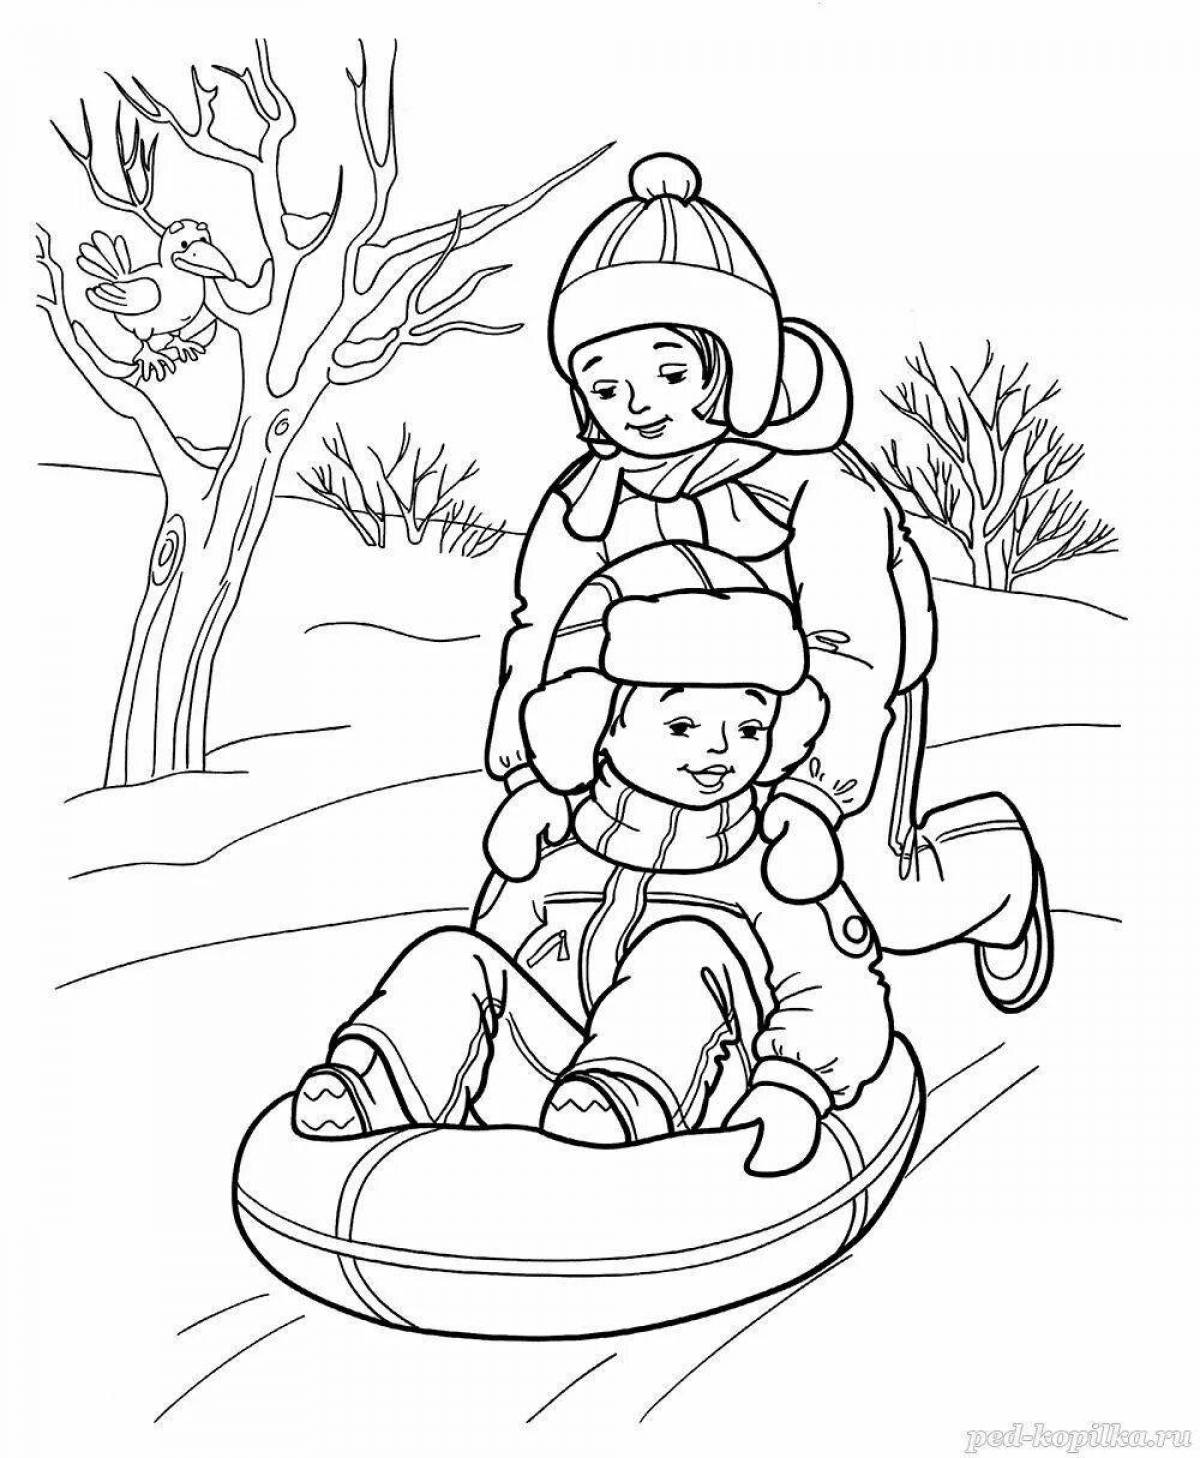 Colouring funny winter safety